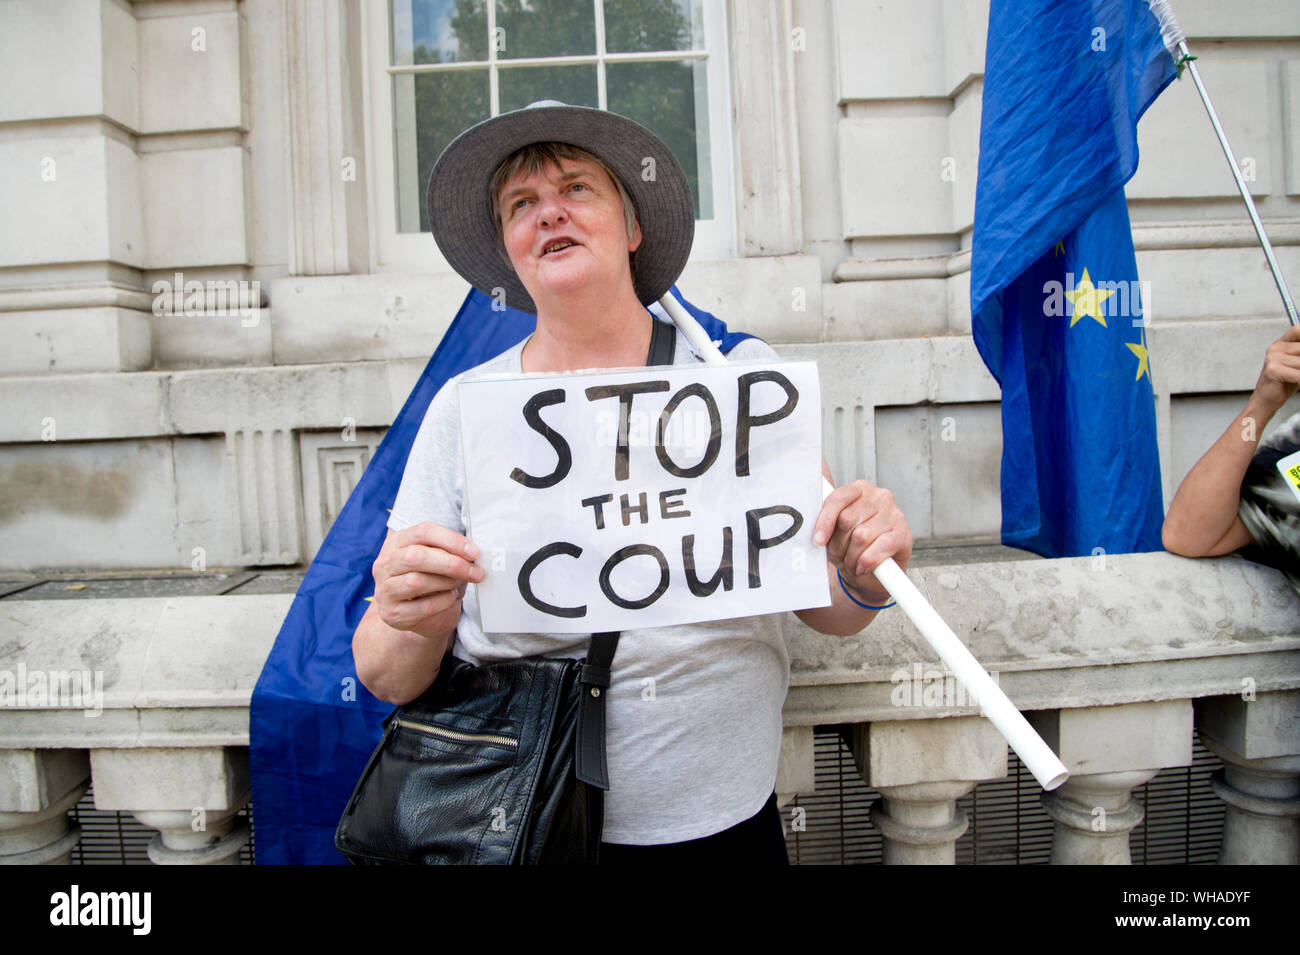 Parliament, Whitehall 2.9.2019. Remain protesters outside the Cabinet Office, one holds a sign saying 'Stop the Coup'. Stock Photo